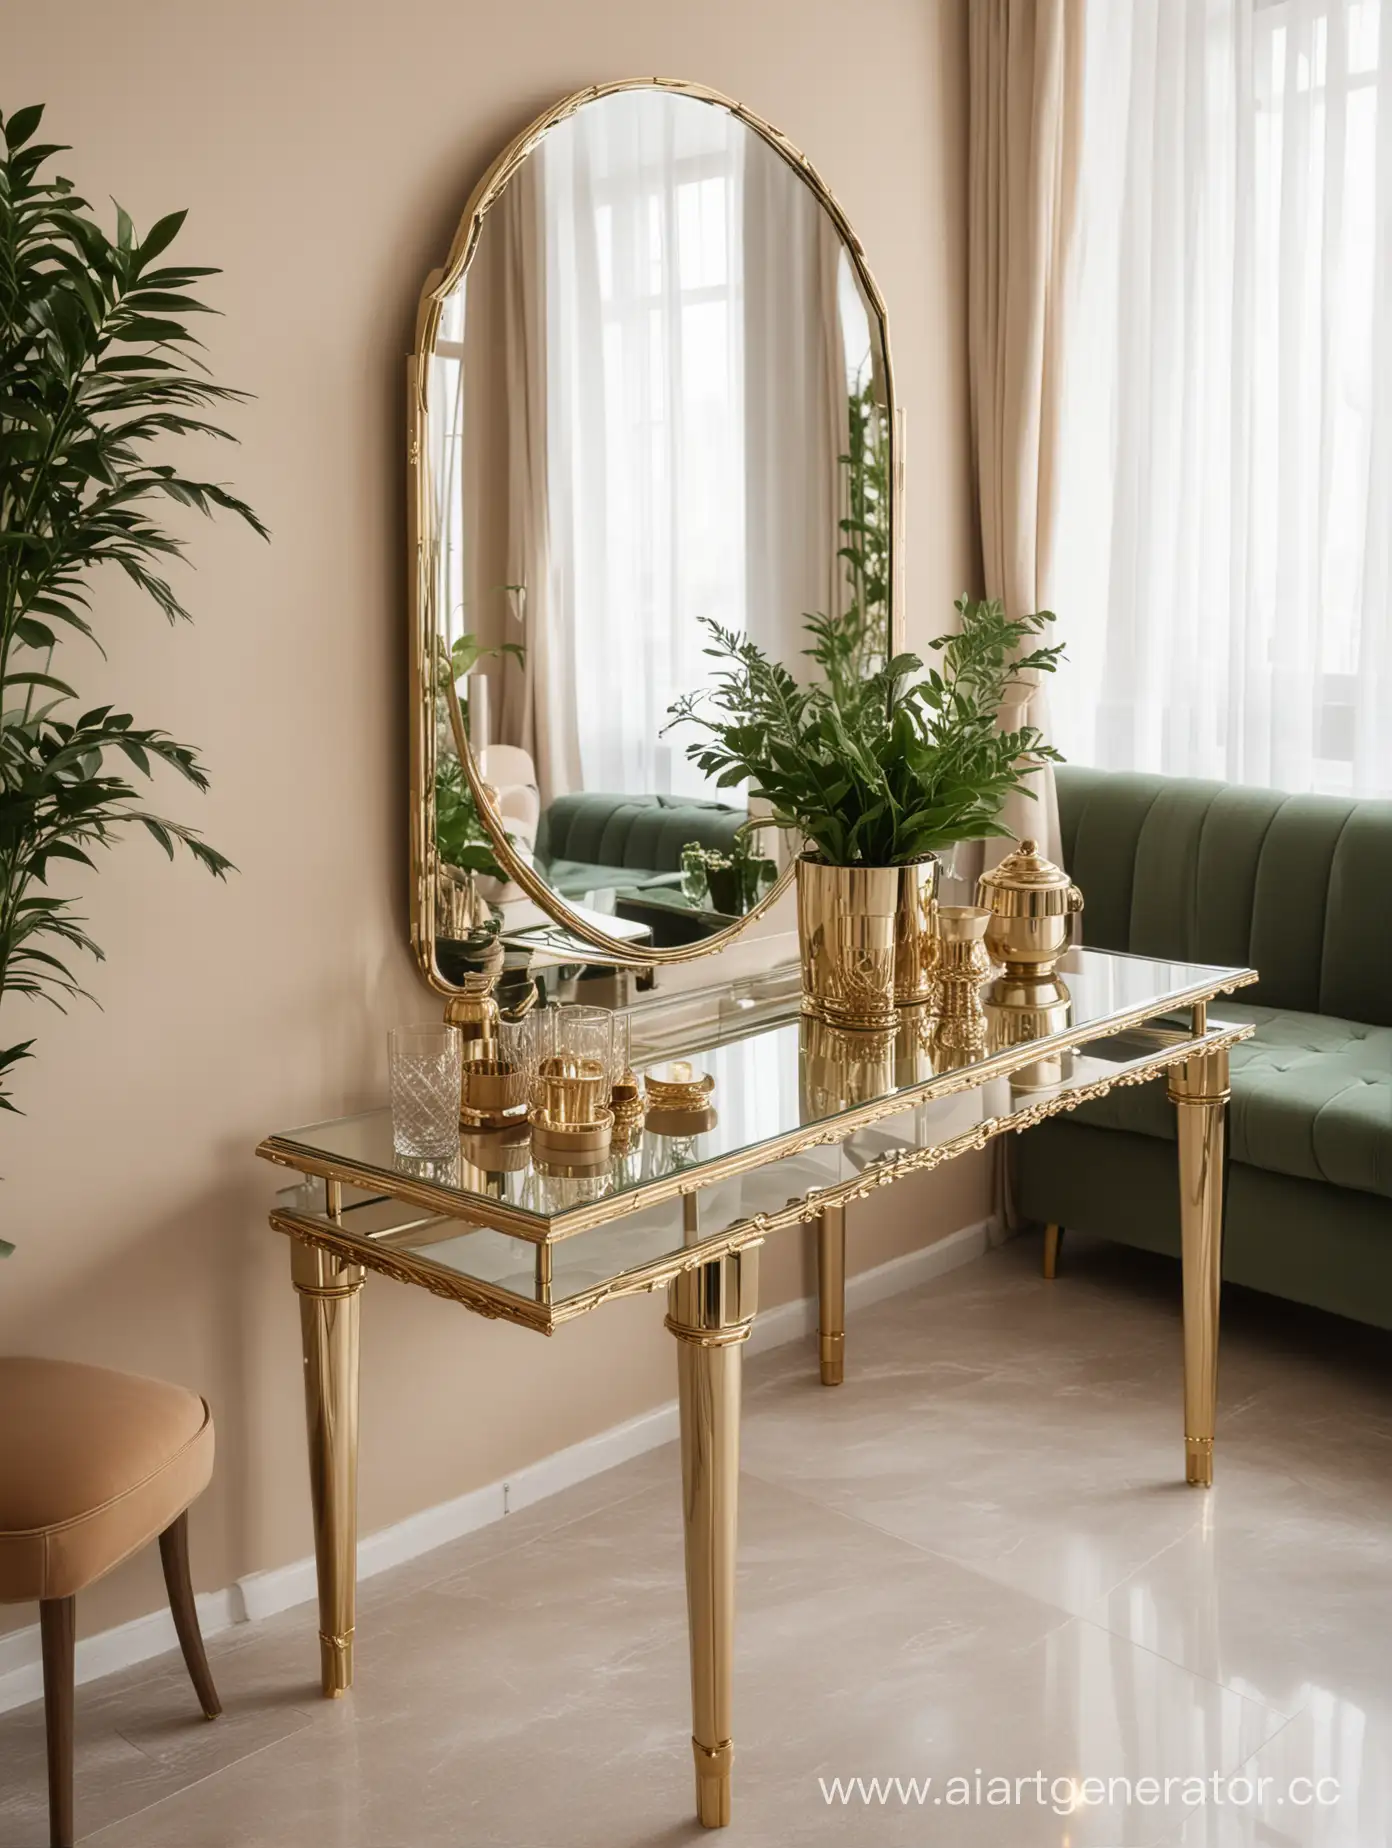 glass mirror table with gold elements, aesthetic restaurant beige colors, greenery